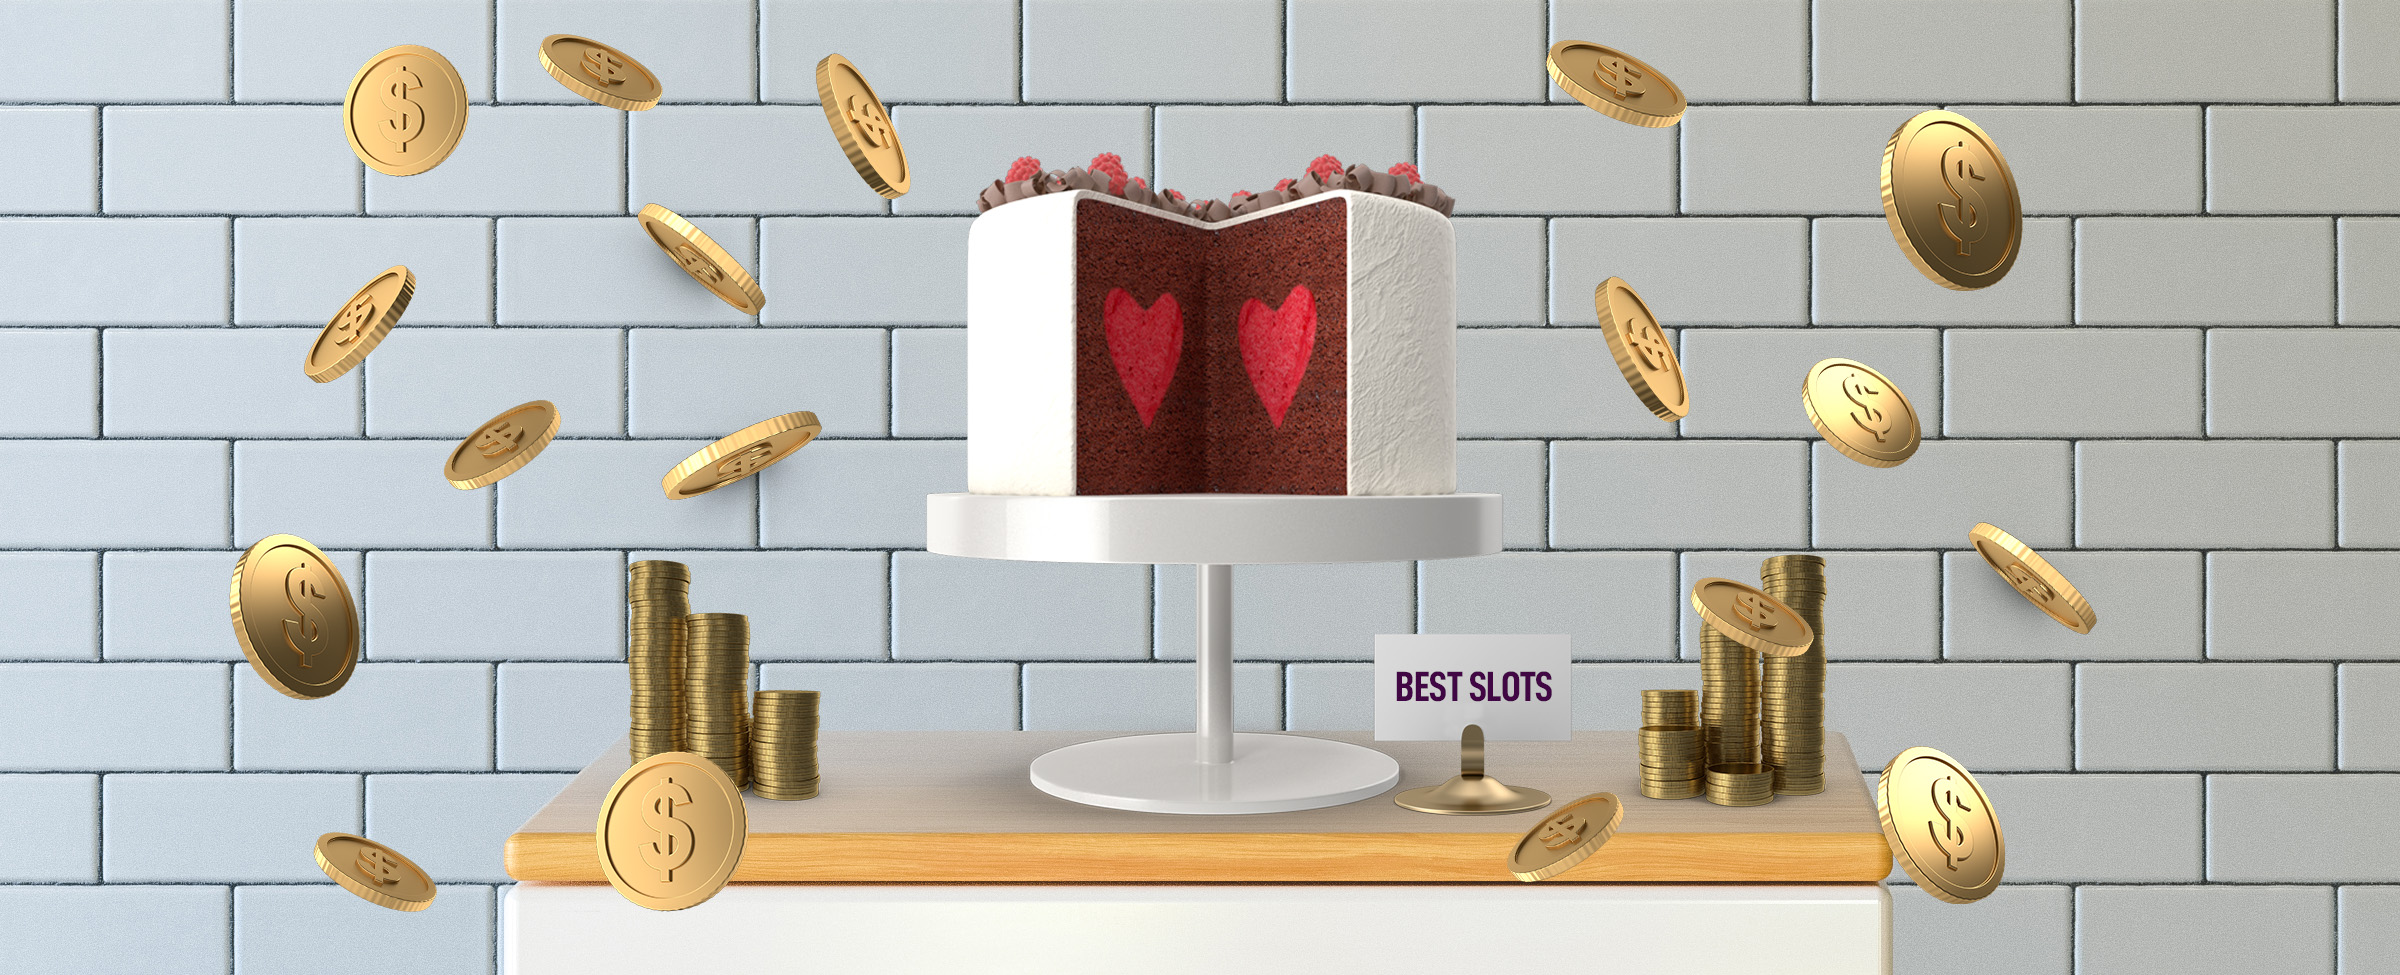 A cake and its accompanying white cake stand sit on a wooden bench in front of a wall clad in crisp white subway tiles. Either side of the cake stand are stacks of coins, surrounded by oversized hovering coins. A small sign beside the cake reads “Best Slots”.